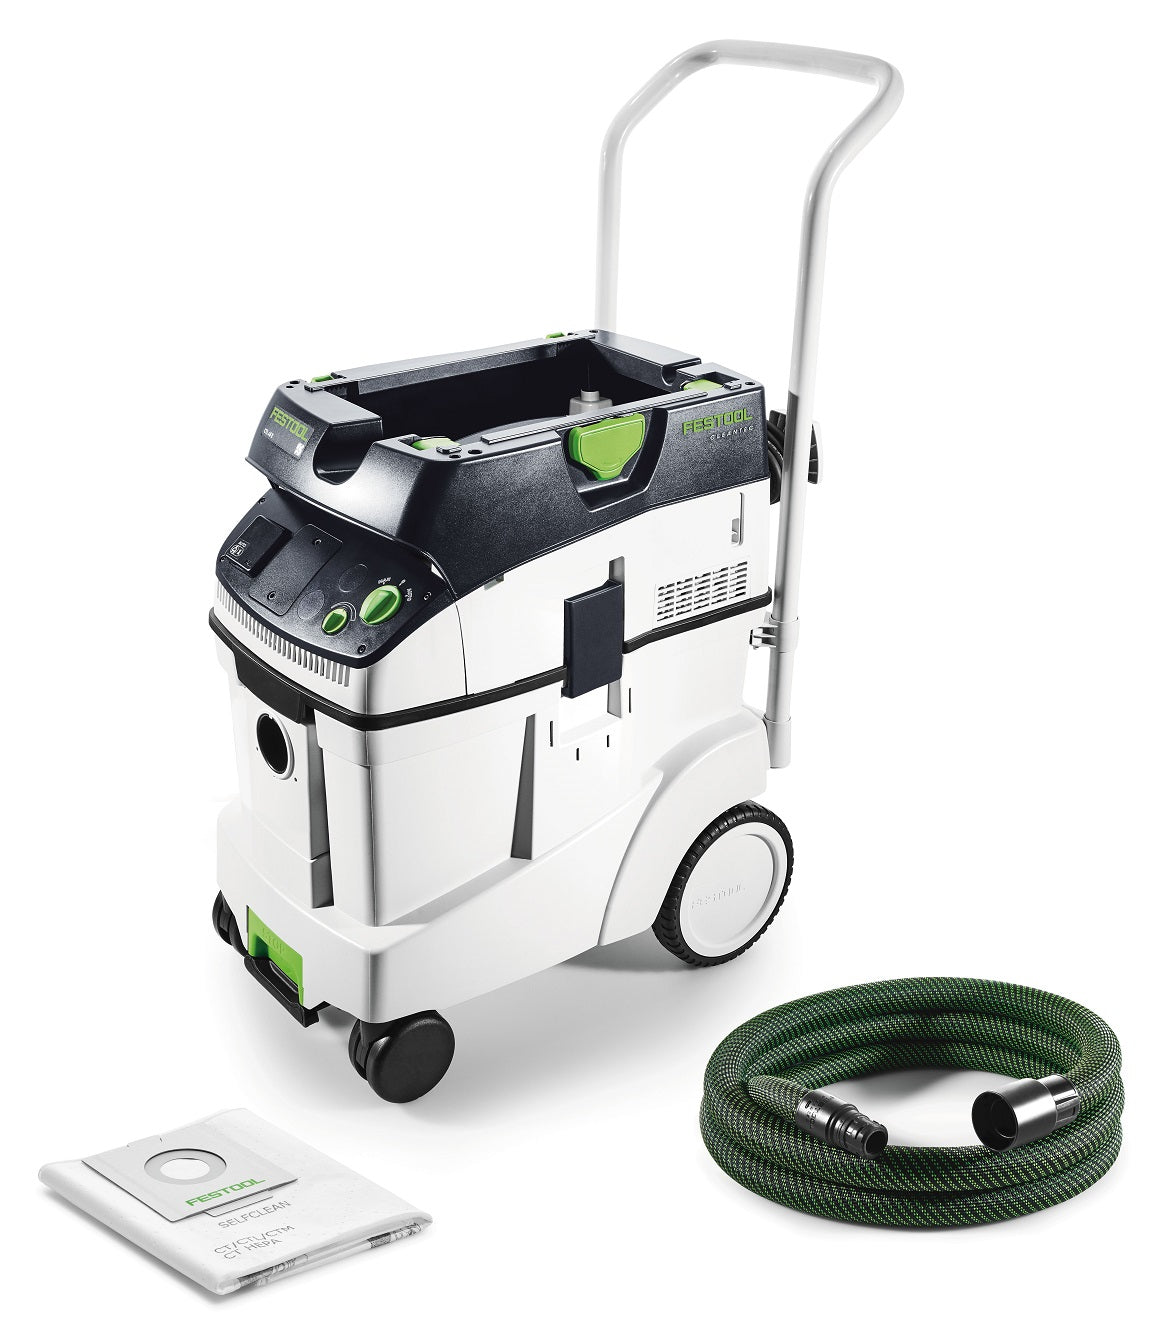 Festool 574938 CT 48 E HEPA Dust Extractor (REPLACED BY 577085)